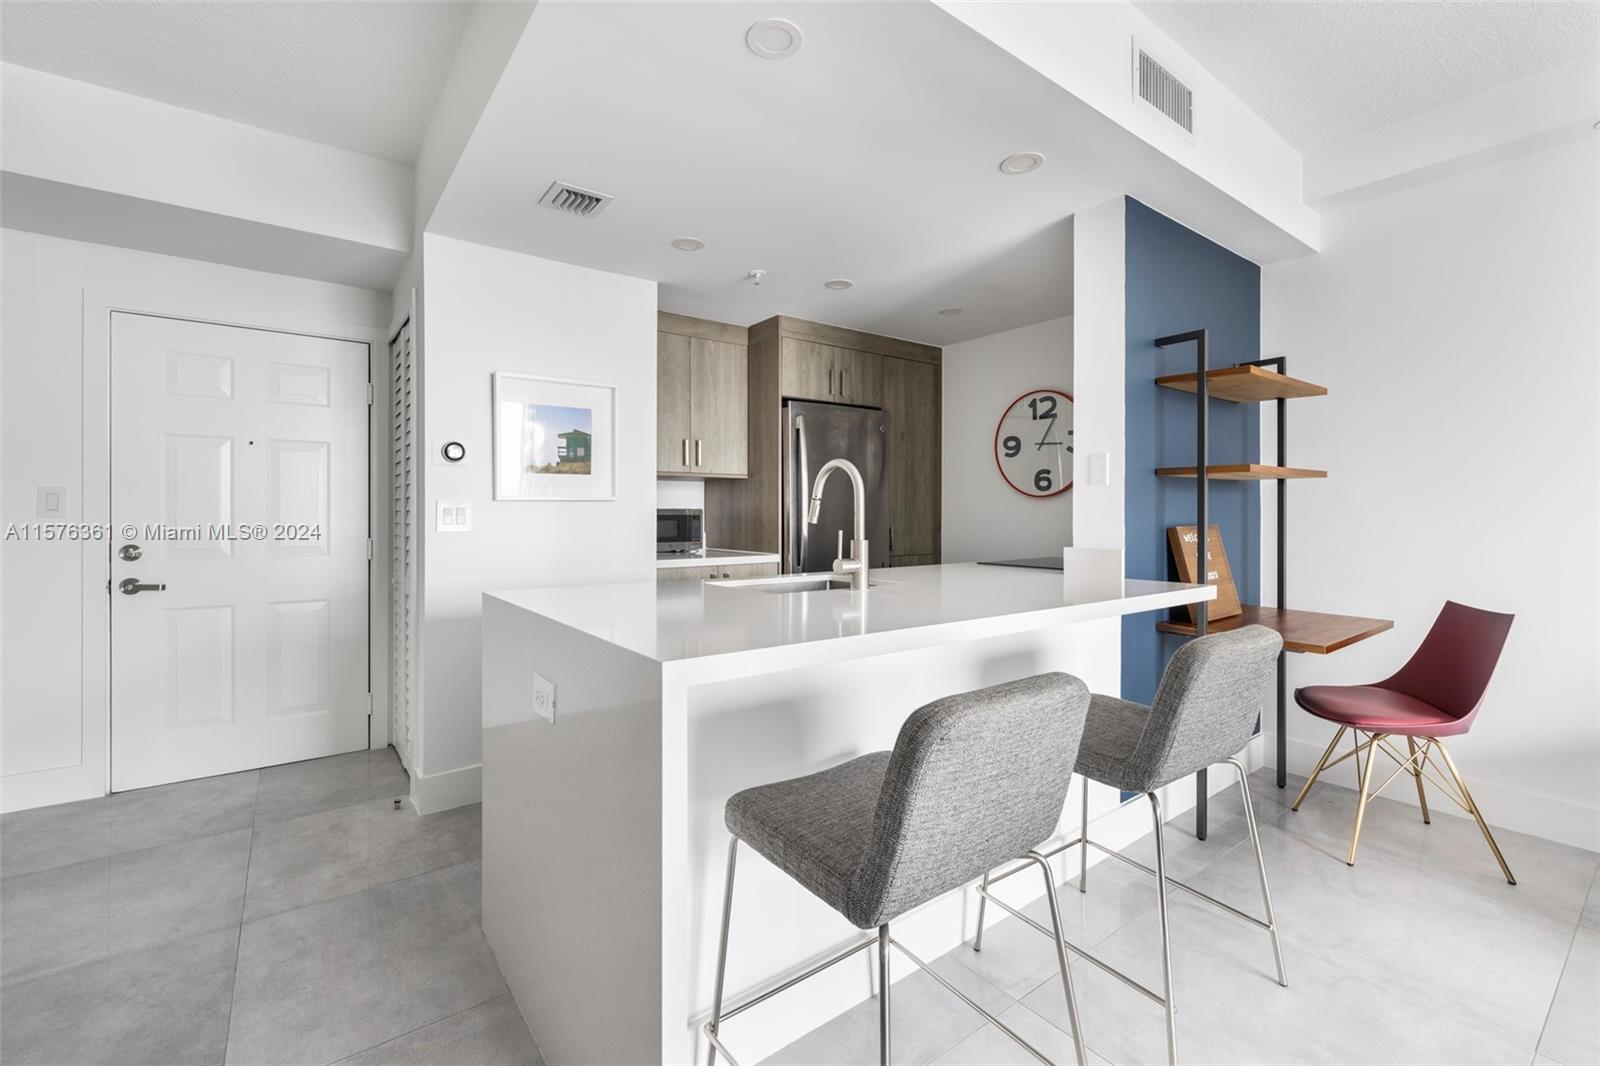 Impeccably renovated by a builder for his daughter, this 1 bed/1 bath unit has an open-concept kitchen, stainless
steel appliances, modern flooring, and finishes. The unit comes furnished and ready for occupancy on June 1st.
Enjoy 24/7 security, on-site management, pool, and a well-appointed gym. Sip your morning coffee with
spectacular city views and Biscayne Bay on the horizon. Seize the opportunity to live a few blocks from the Arsht
Center, Miami Heat Arena, Frost Science and Perez Art Museums, restaurants, shops, and more. Convenient access
to I/95, I112 (to Miami Airport), Miami Beach. Miami is at your doorstep!